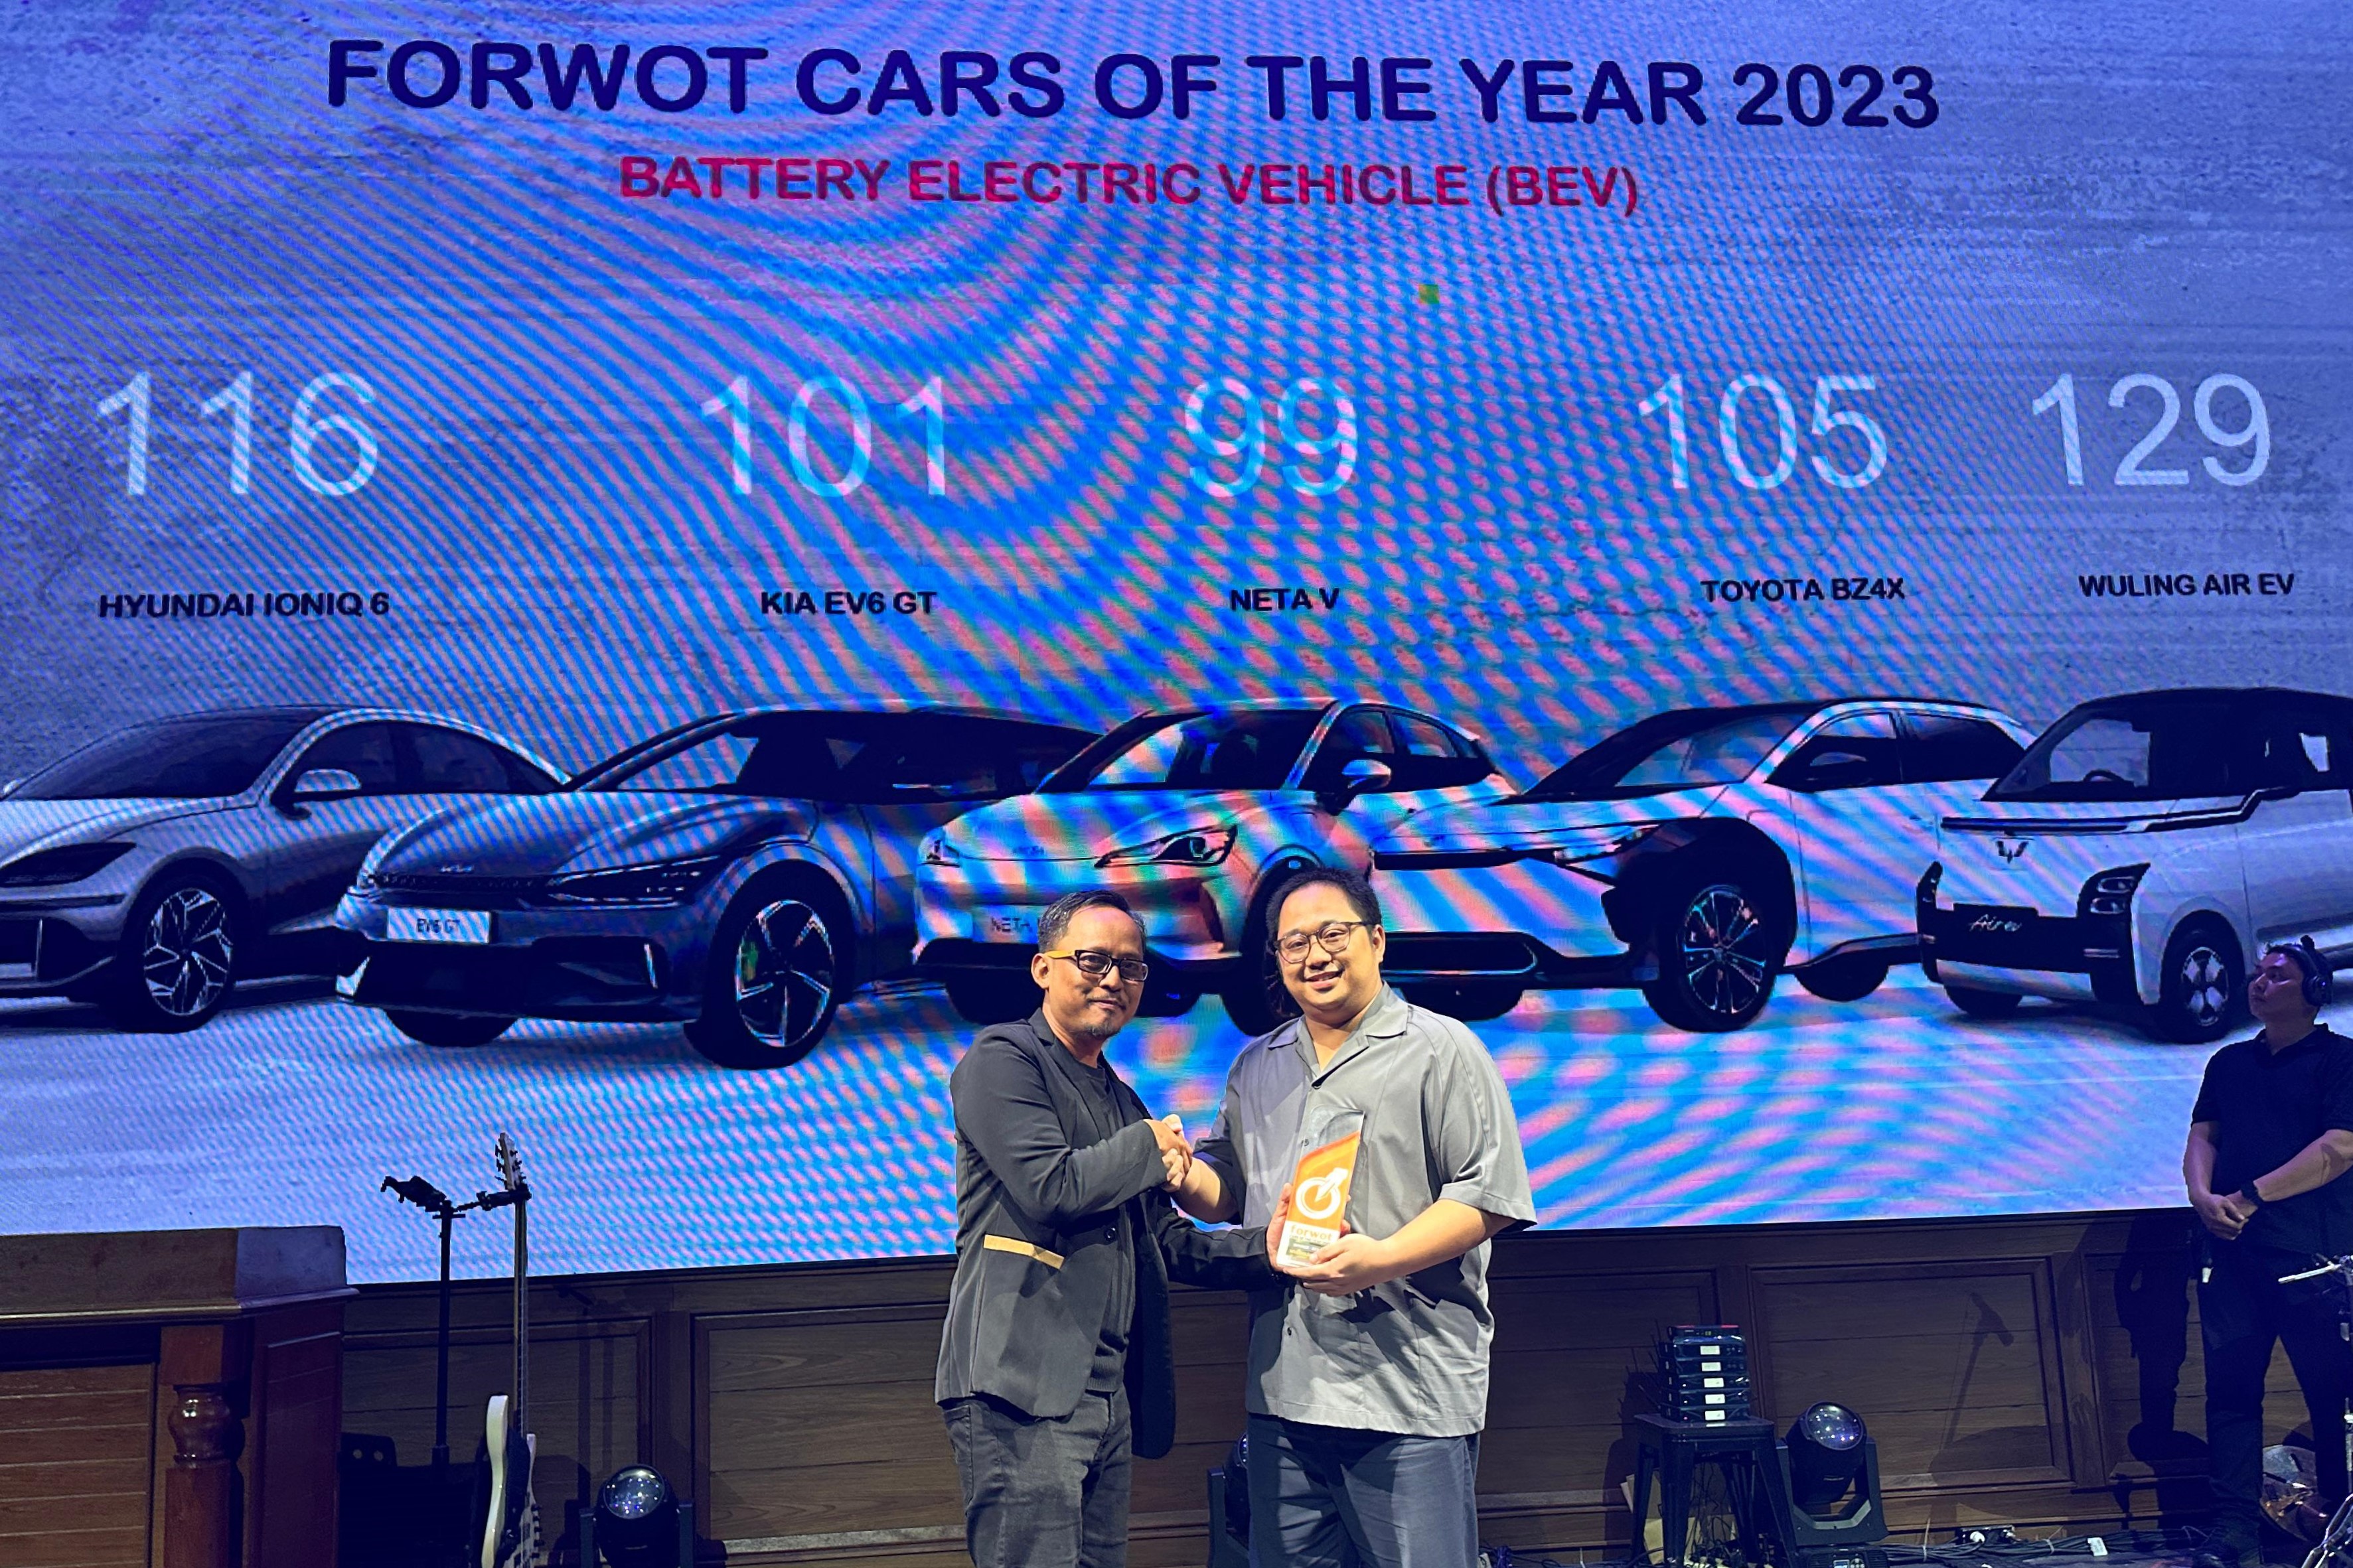 Image Wuling Air ev Awarded as FORWOT Car of the Year 2023 Category Battery Electric Vehicle